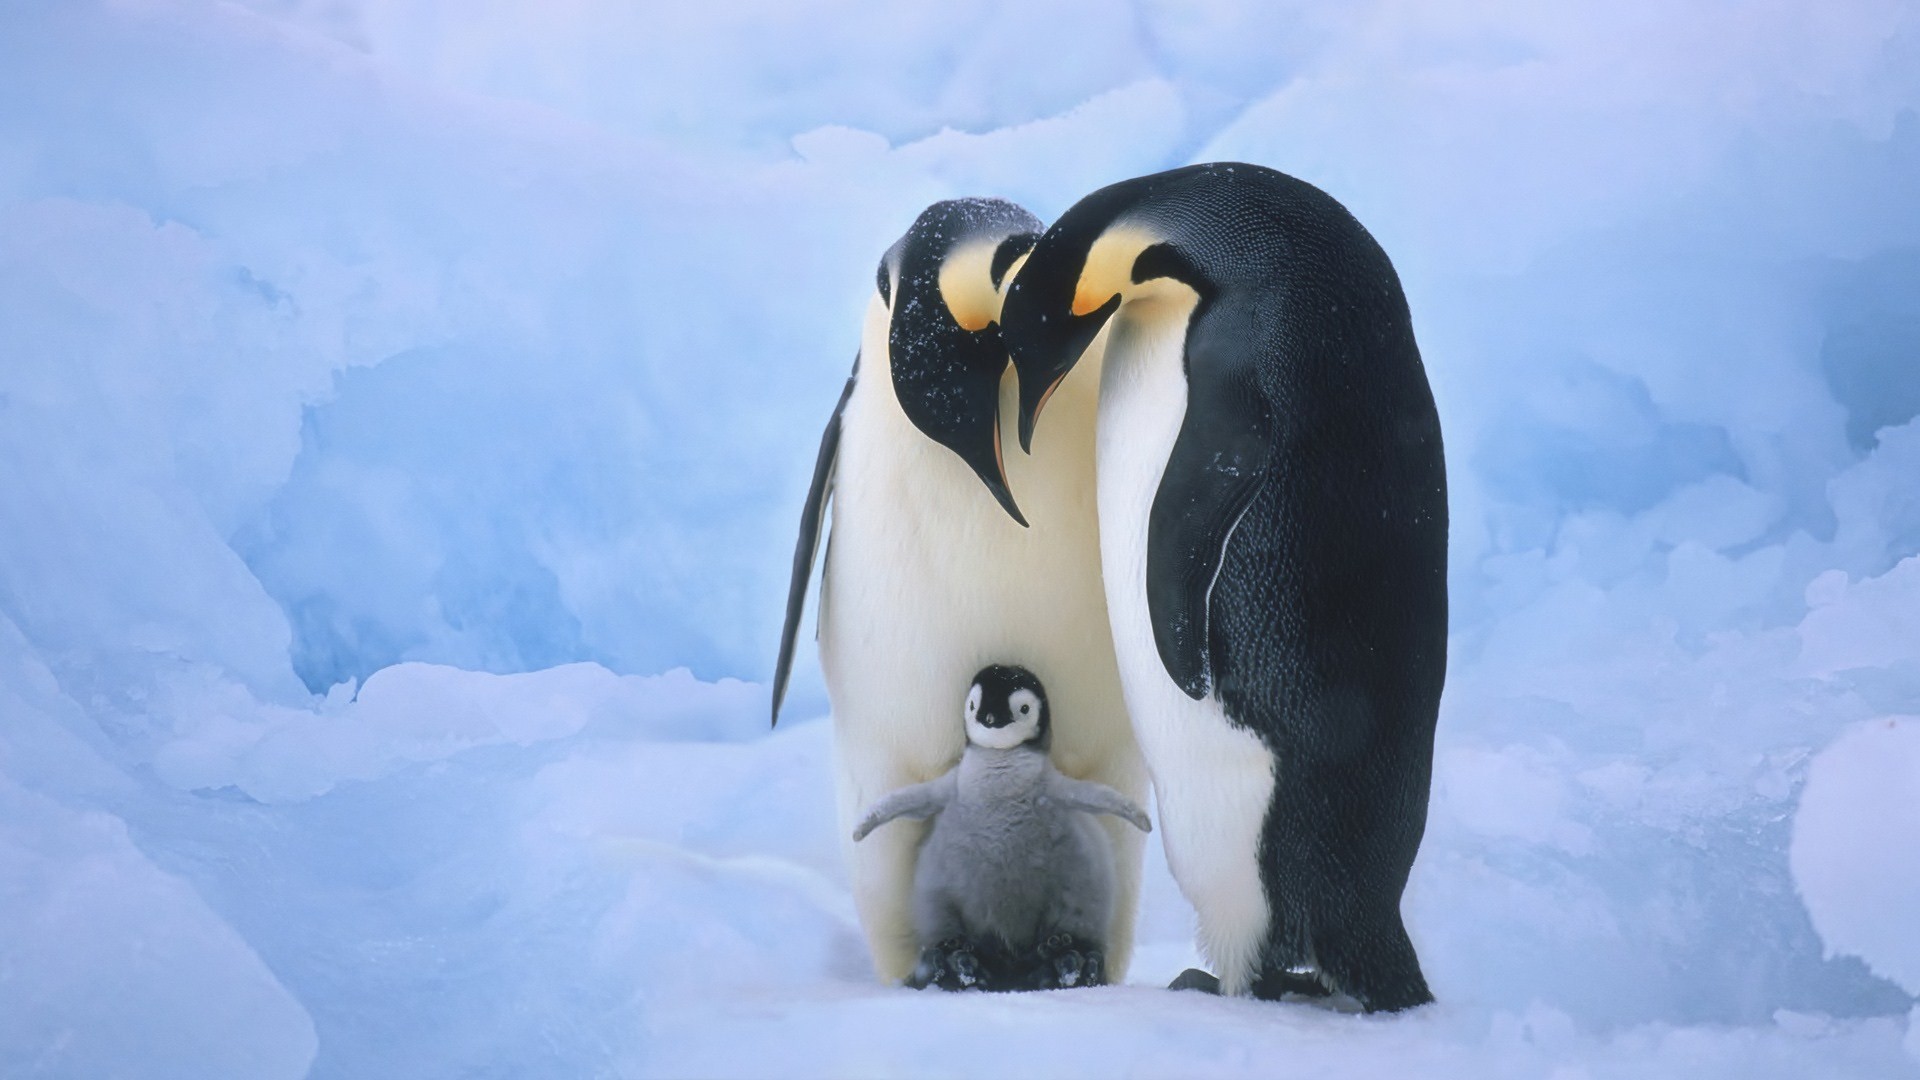 1920x1080 Filename: Penguin-HD-Wallpapers-and-Pictures-3.jpg